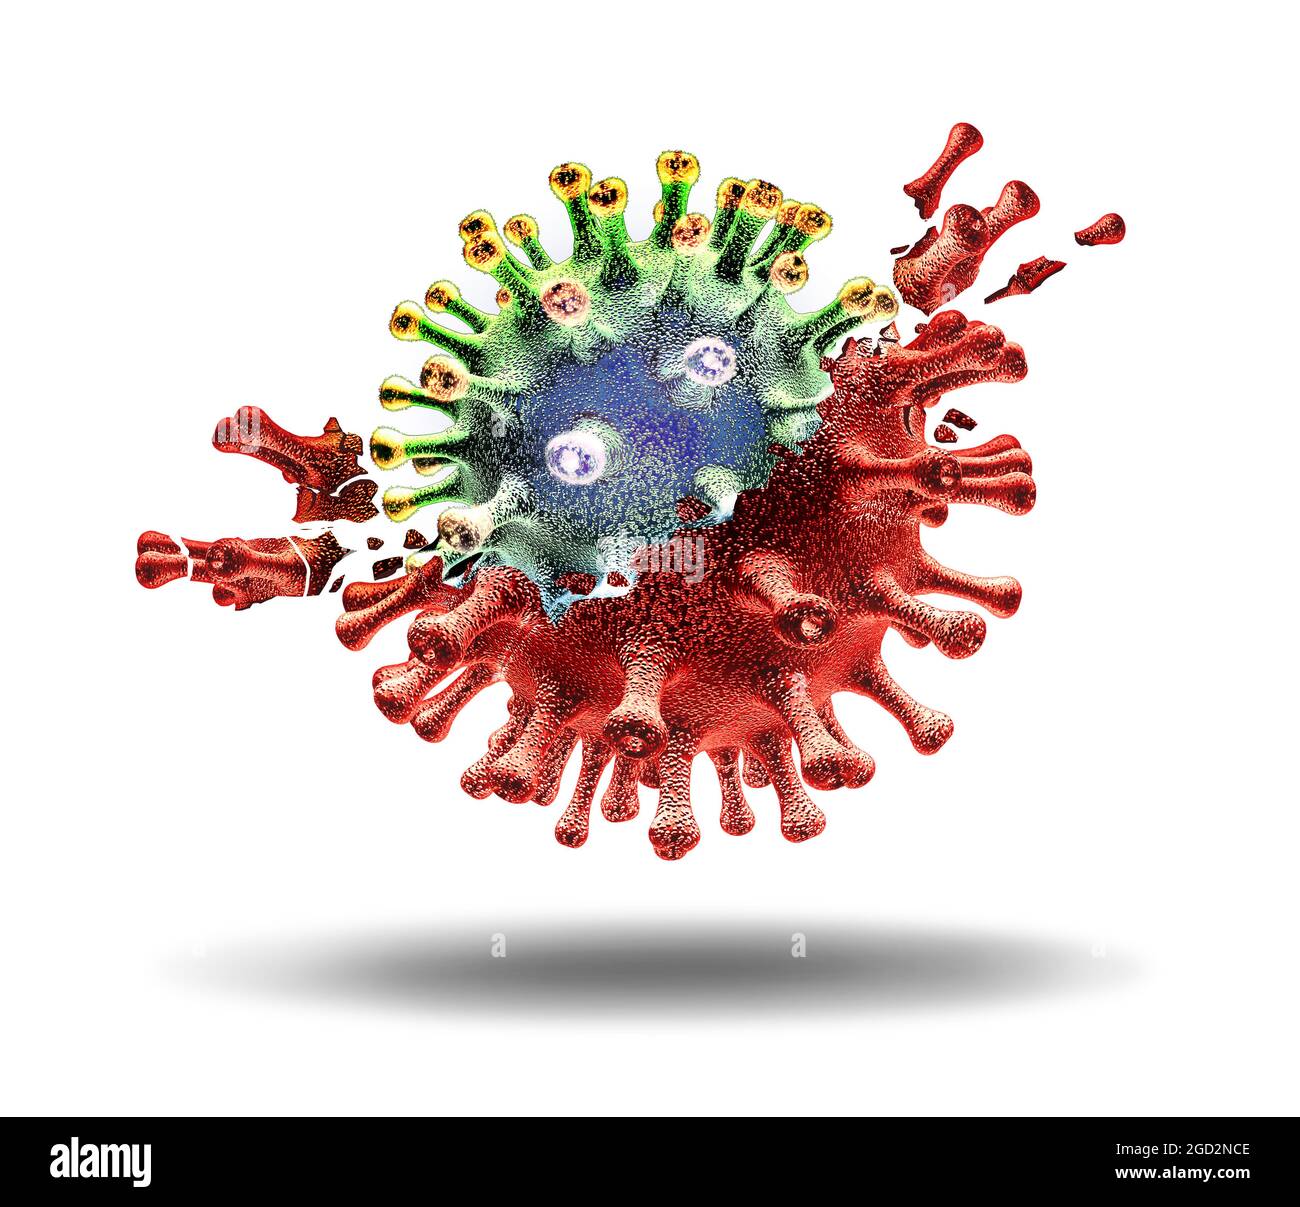 Variant virus cell concept and new mutating coronavirus variants outbreak or covid-19 viral delta outbreak as a mutation of influenza as dangerous. Stock Photo